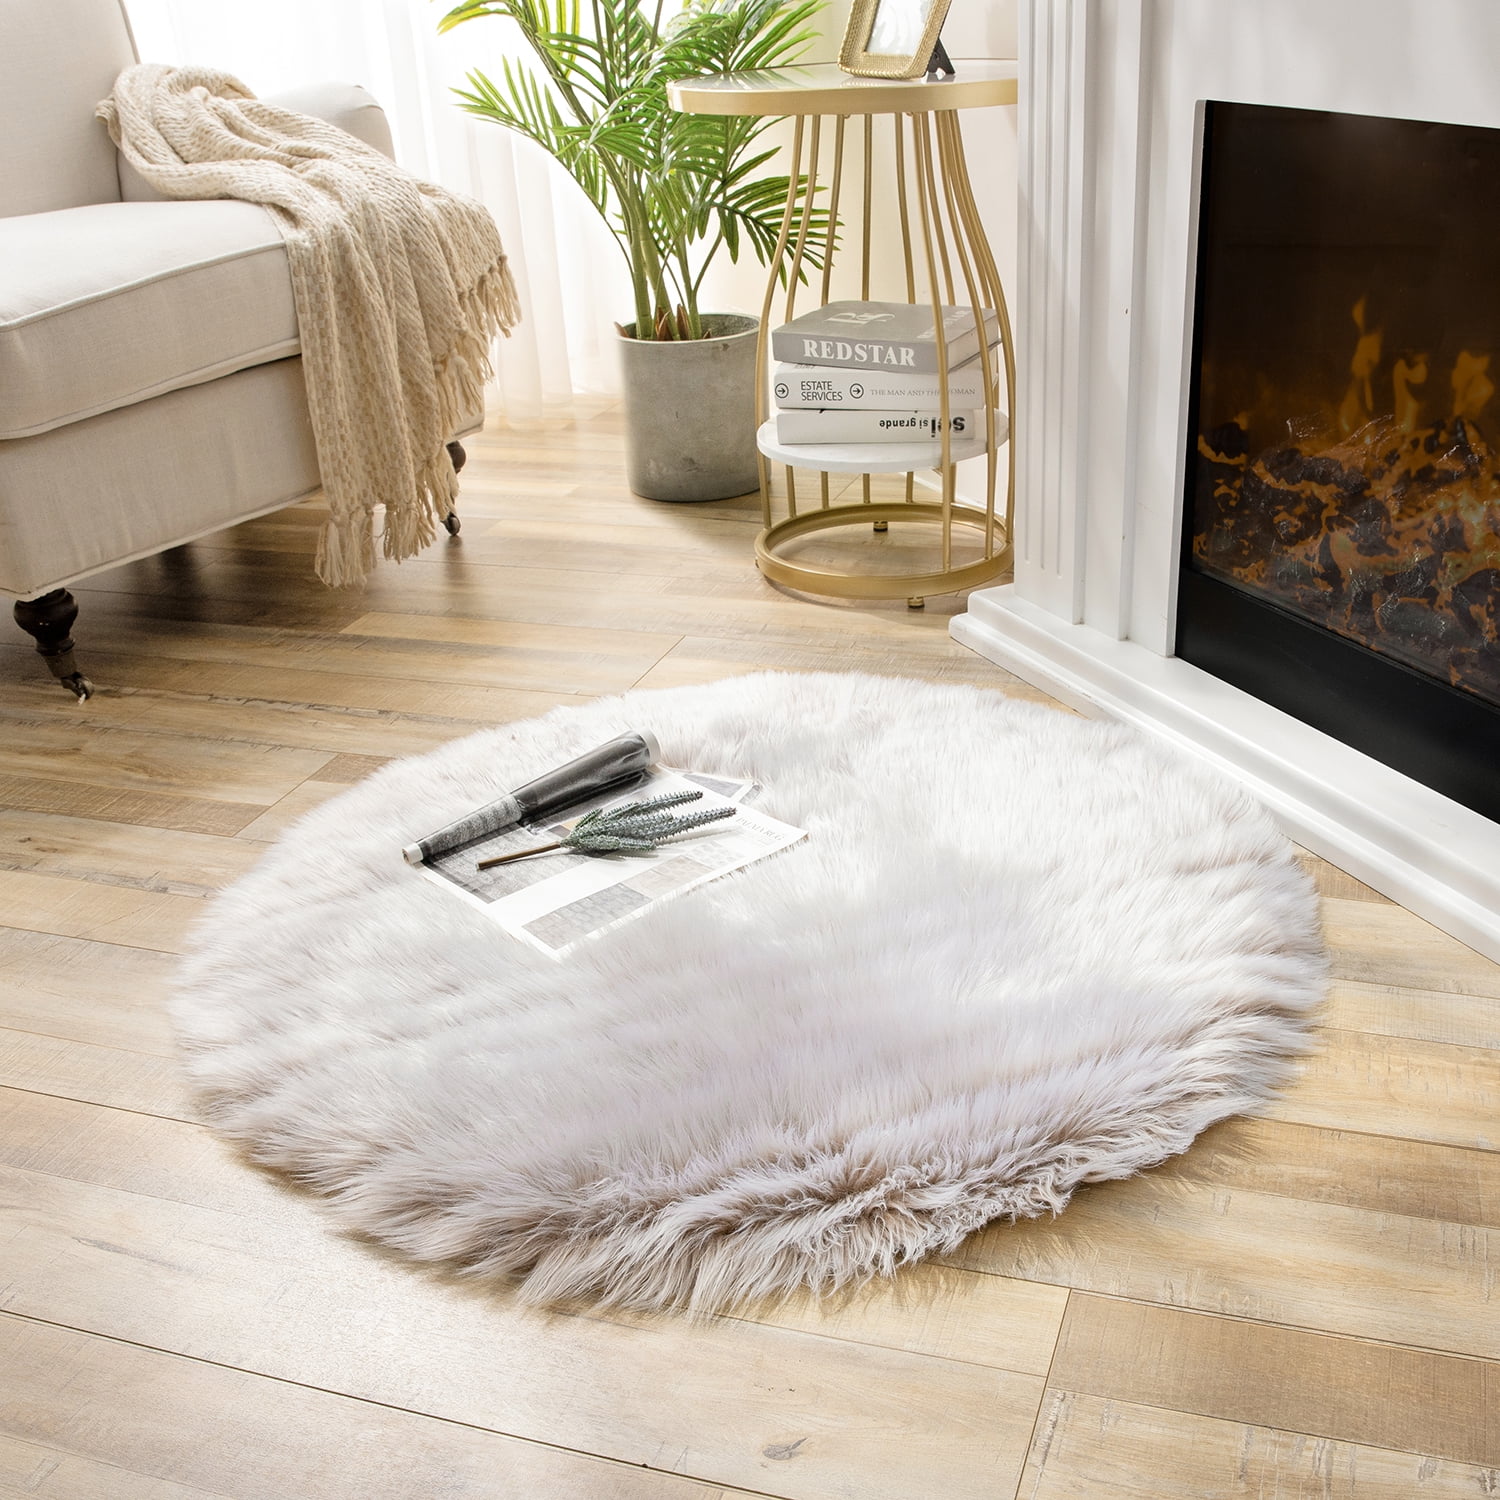 Details about   Faux Fur Sheepskin Area Rug Fluffy Mat Room Sofa Bed Shaggy Floor Carpet Round 